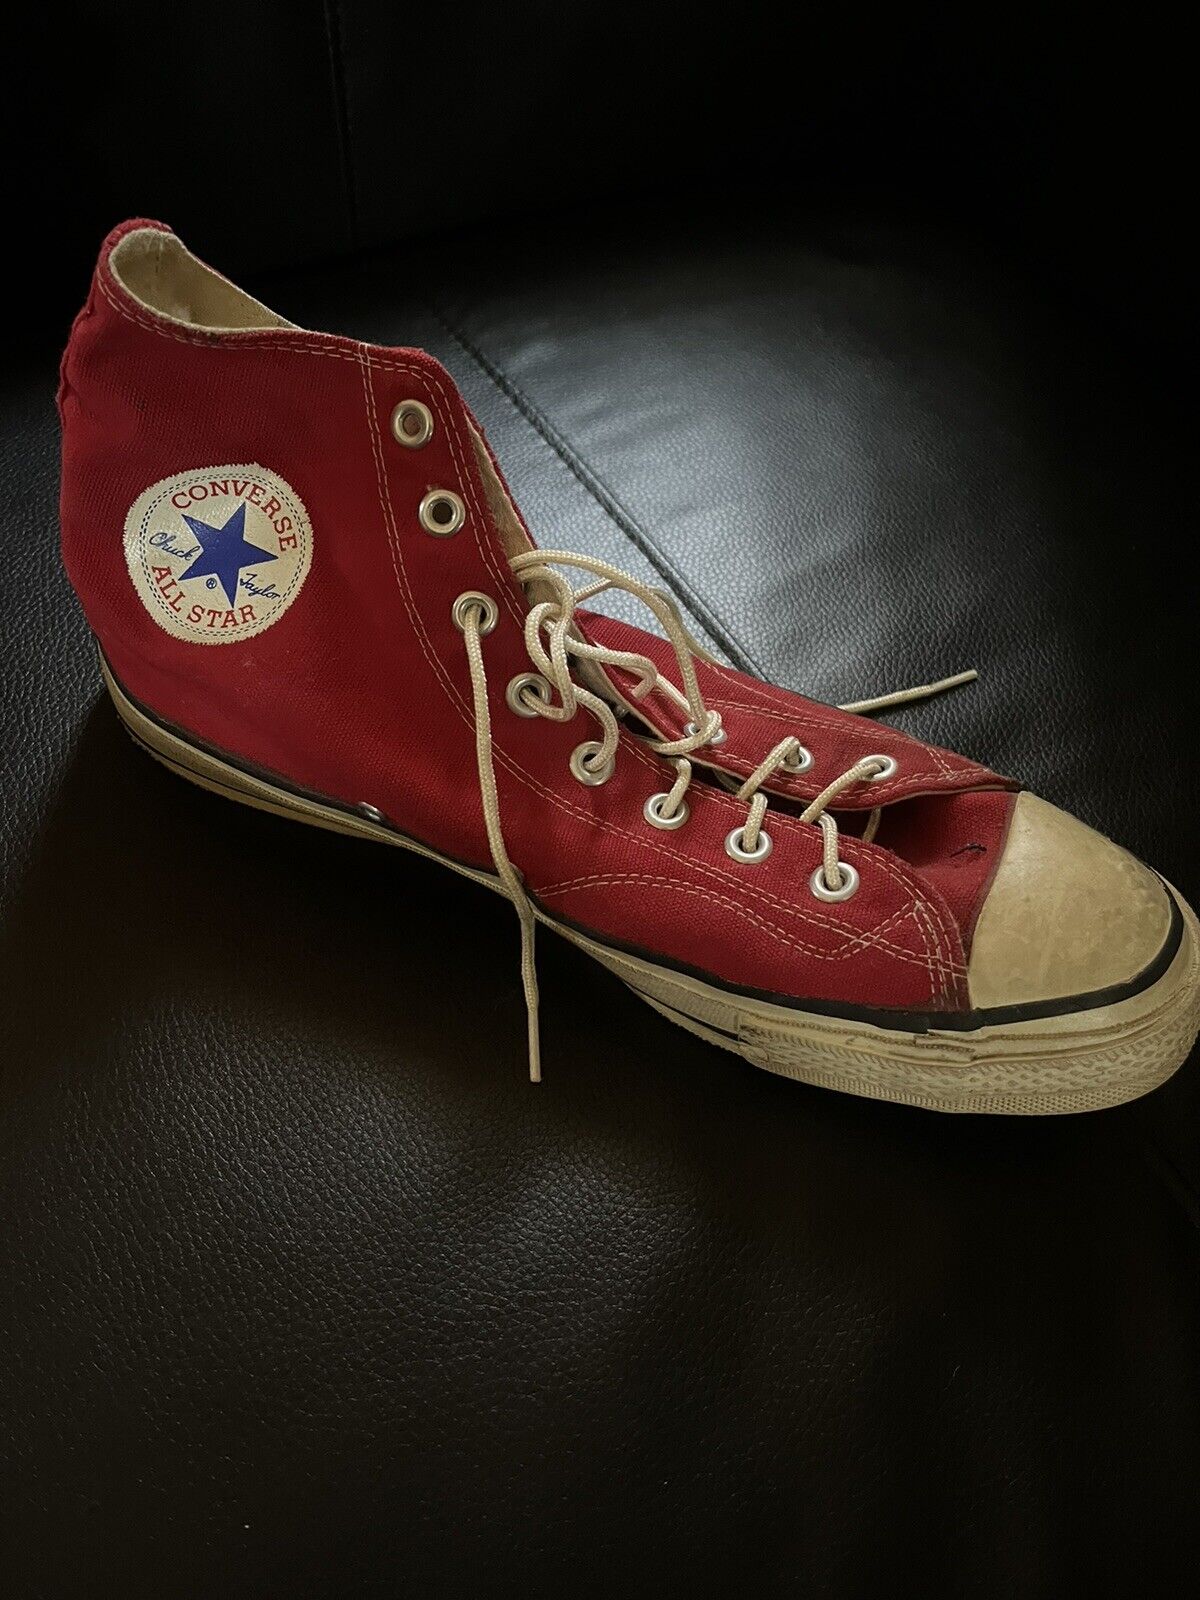 Vintage 1970's Chuck Taylor All Star Converse Hig… - image 5